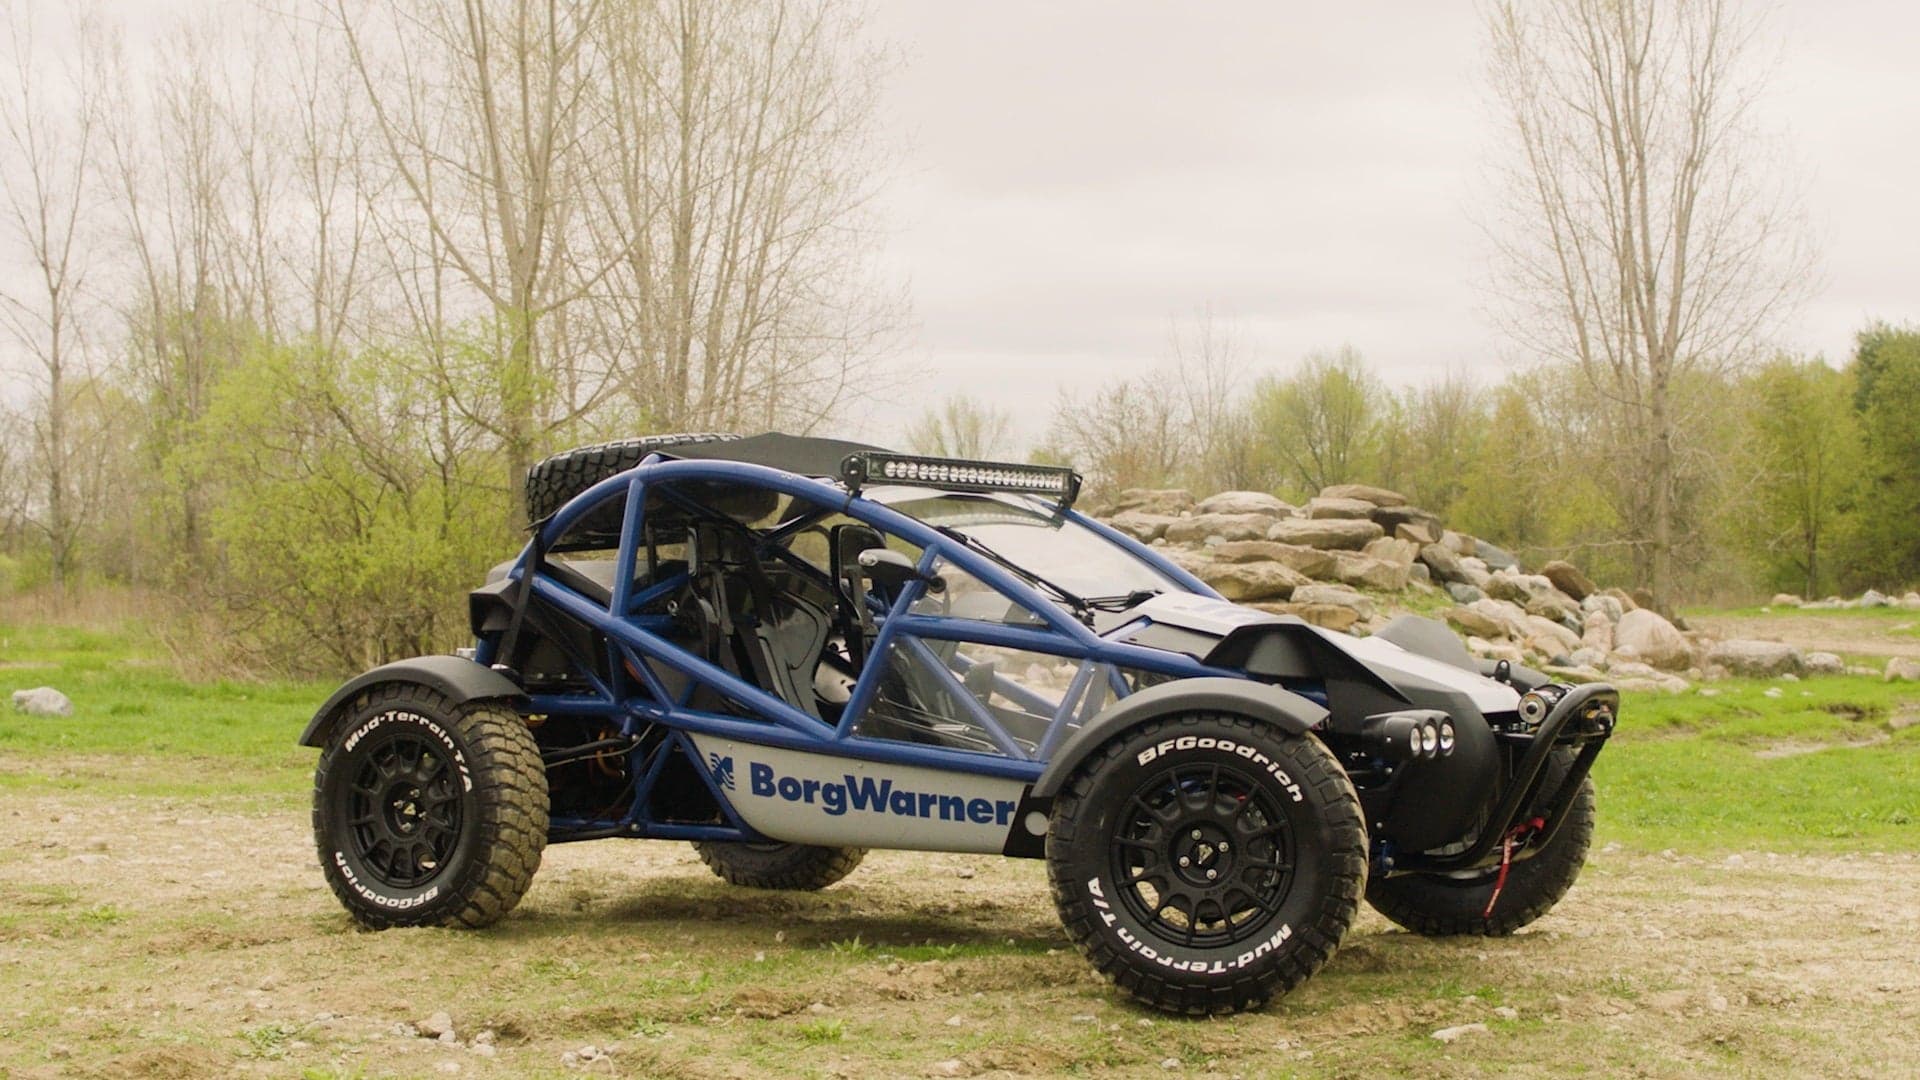 This Sweet Ariel Nomad EV Built by BorgWarner Previews the Off-Roader of the Future